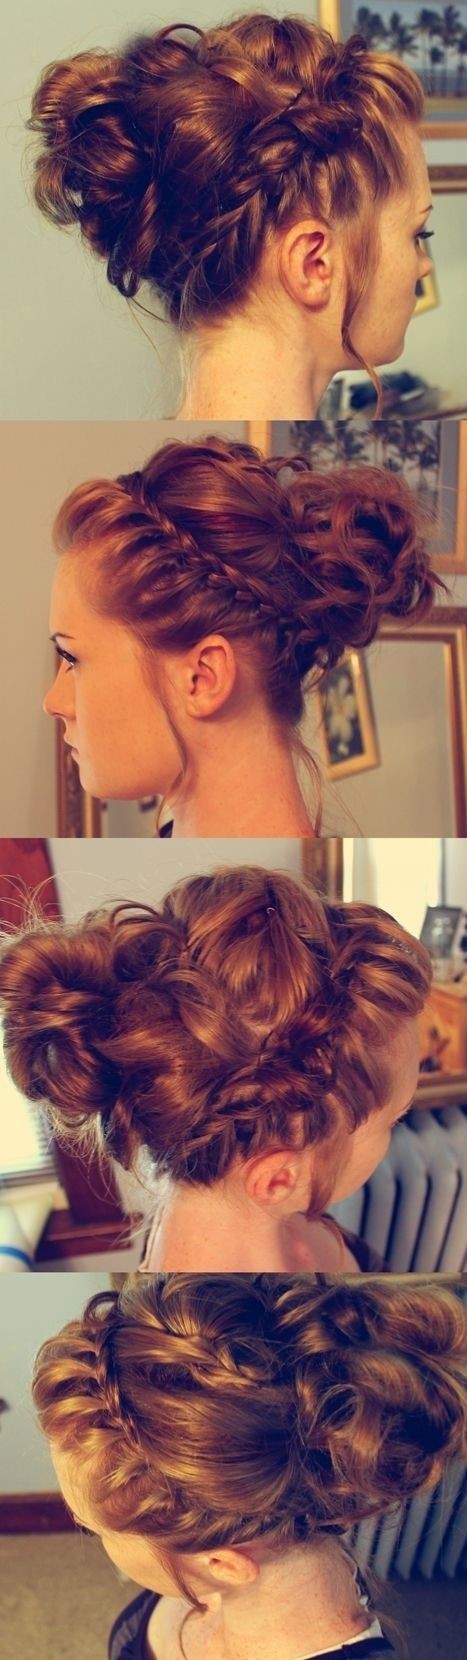 Gorgeous hair up-do idea for prom